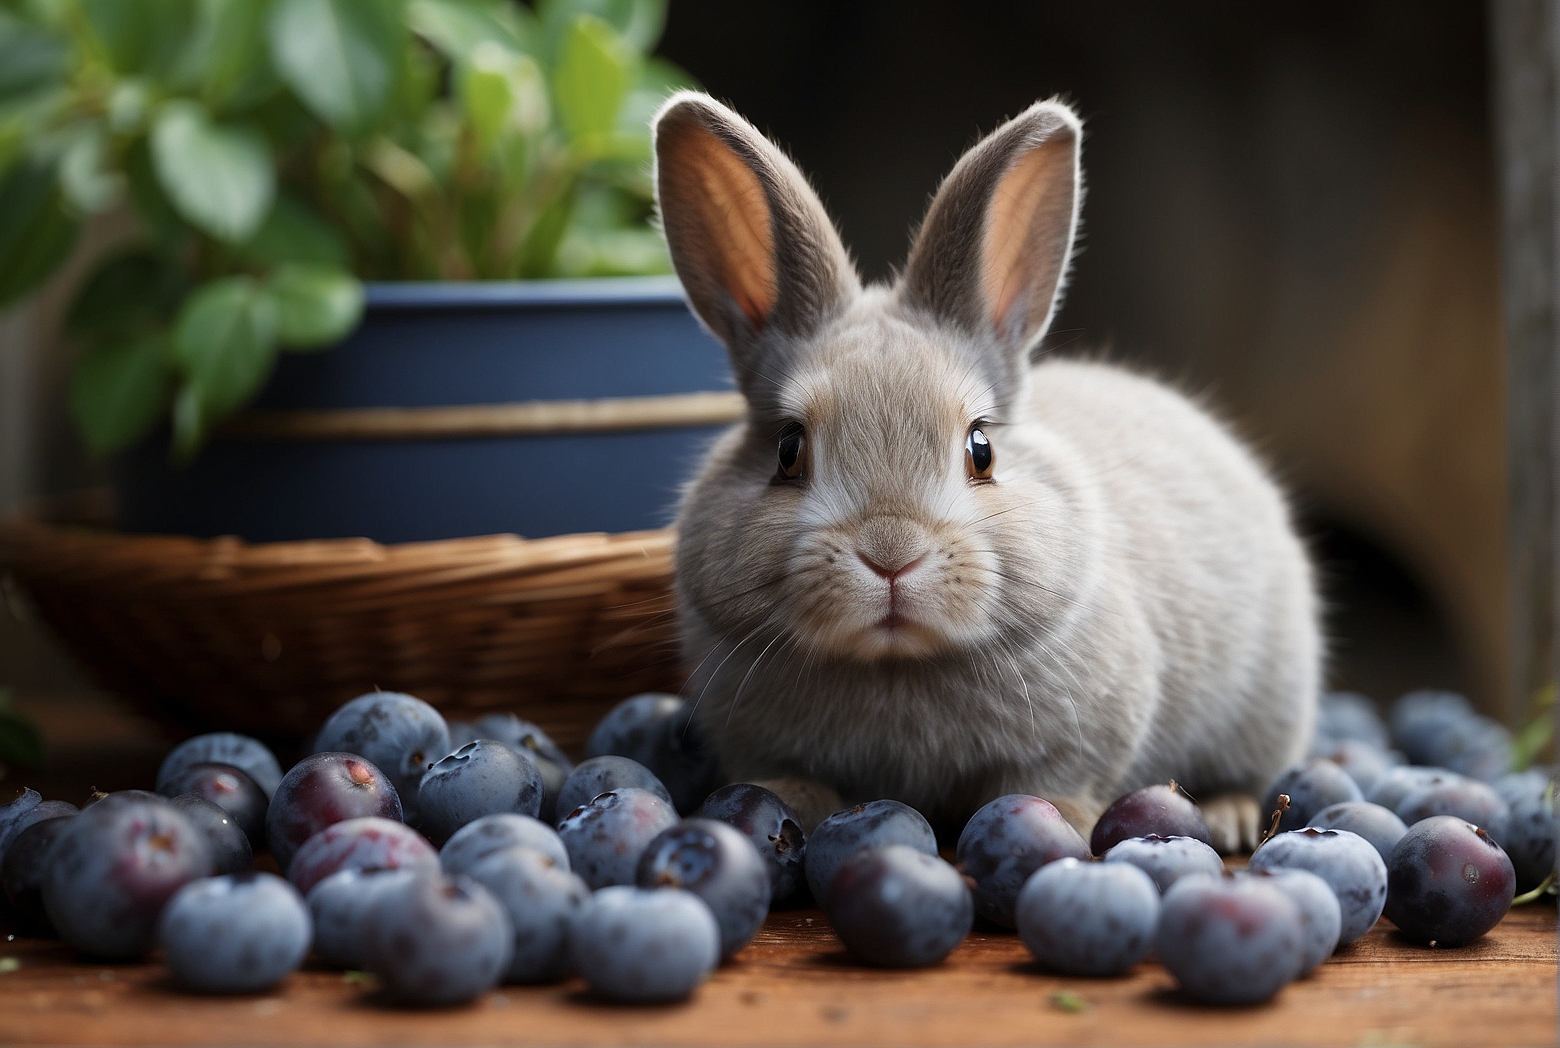 Can Netherland Dwarf Rabbits Eat Blueberries?